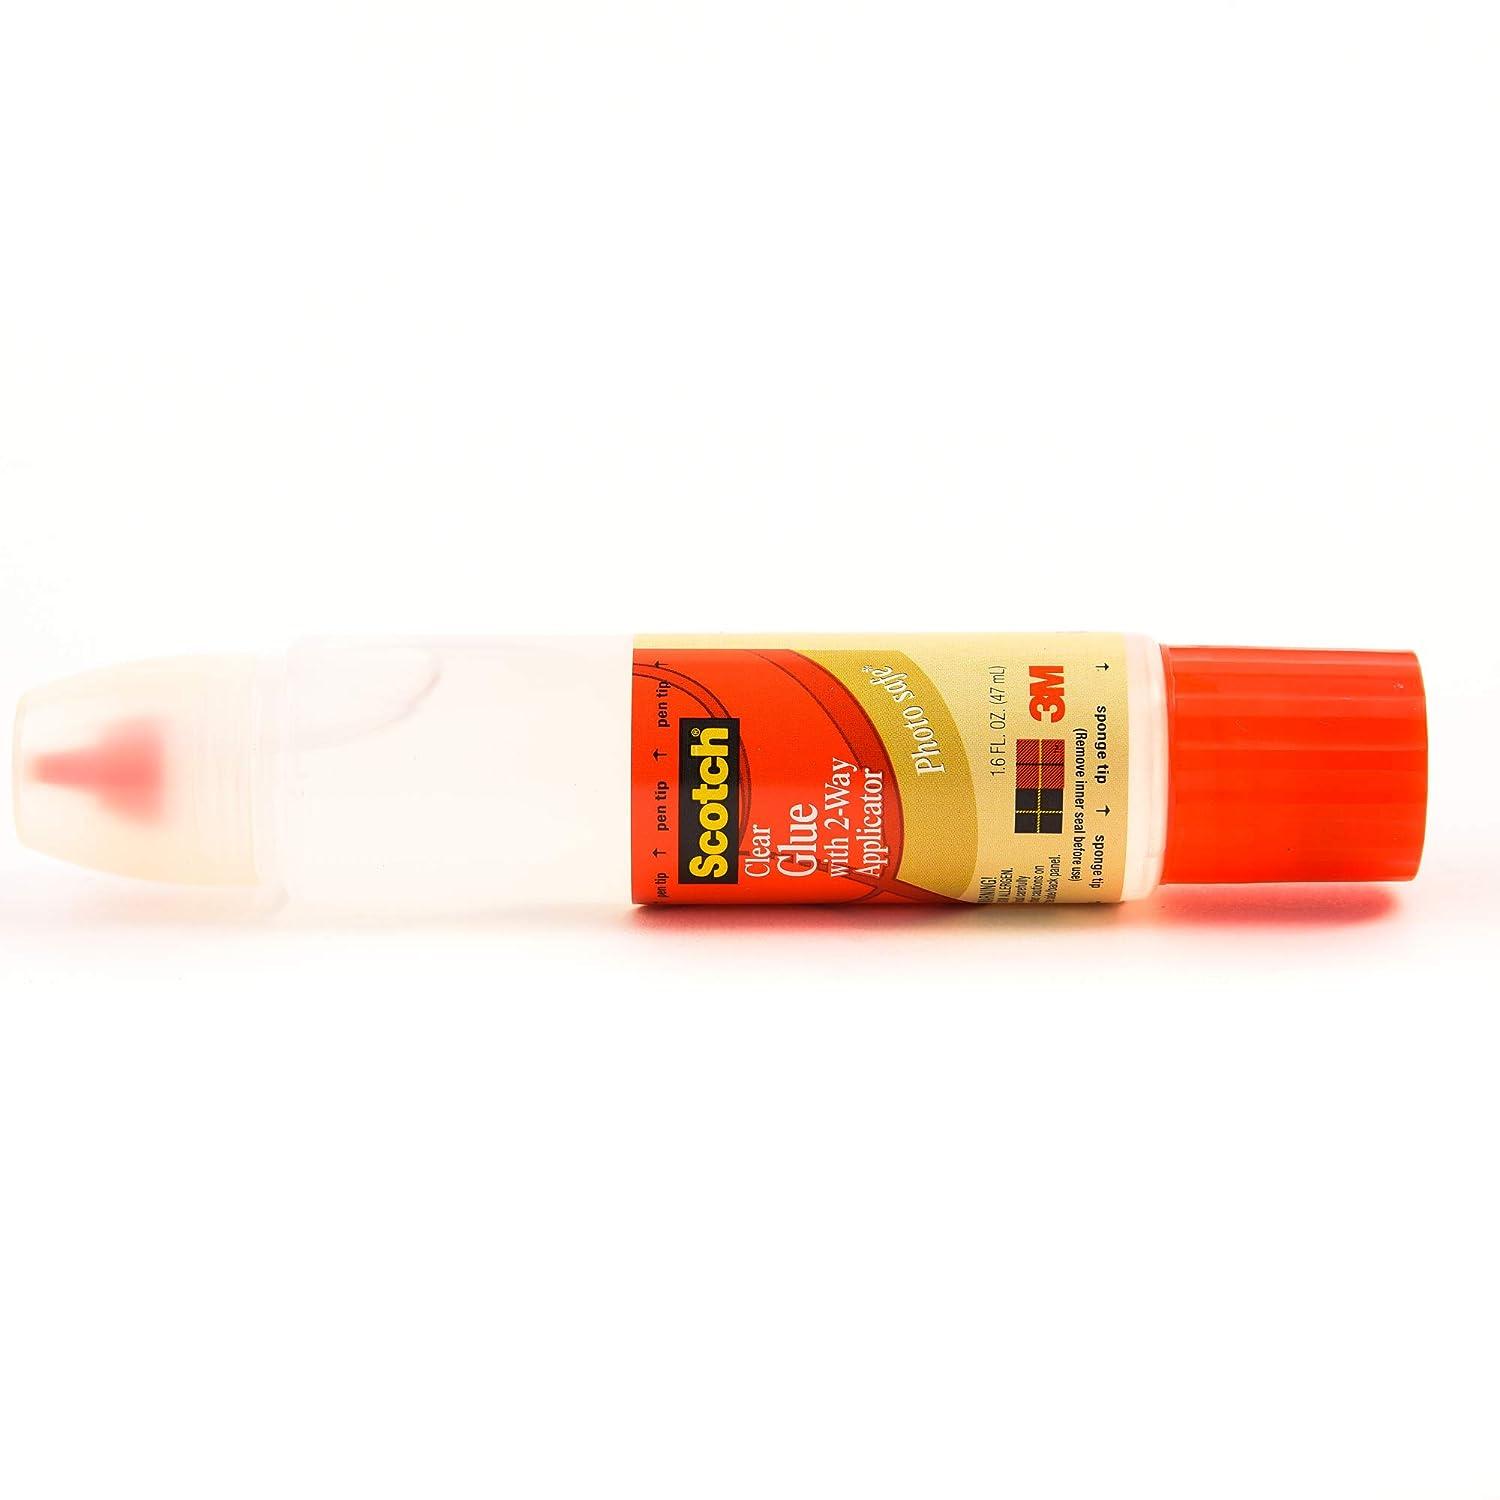 3M Clear Glue with 2-Way Applicator 6050